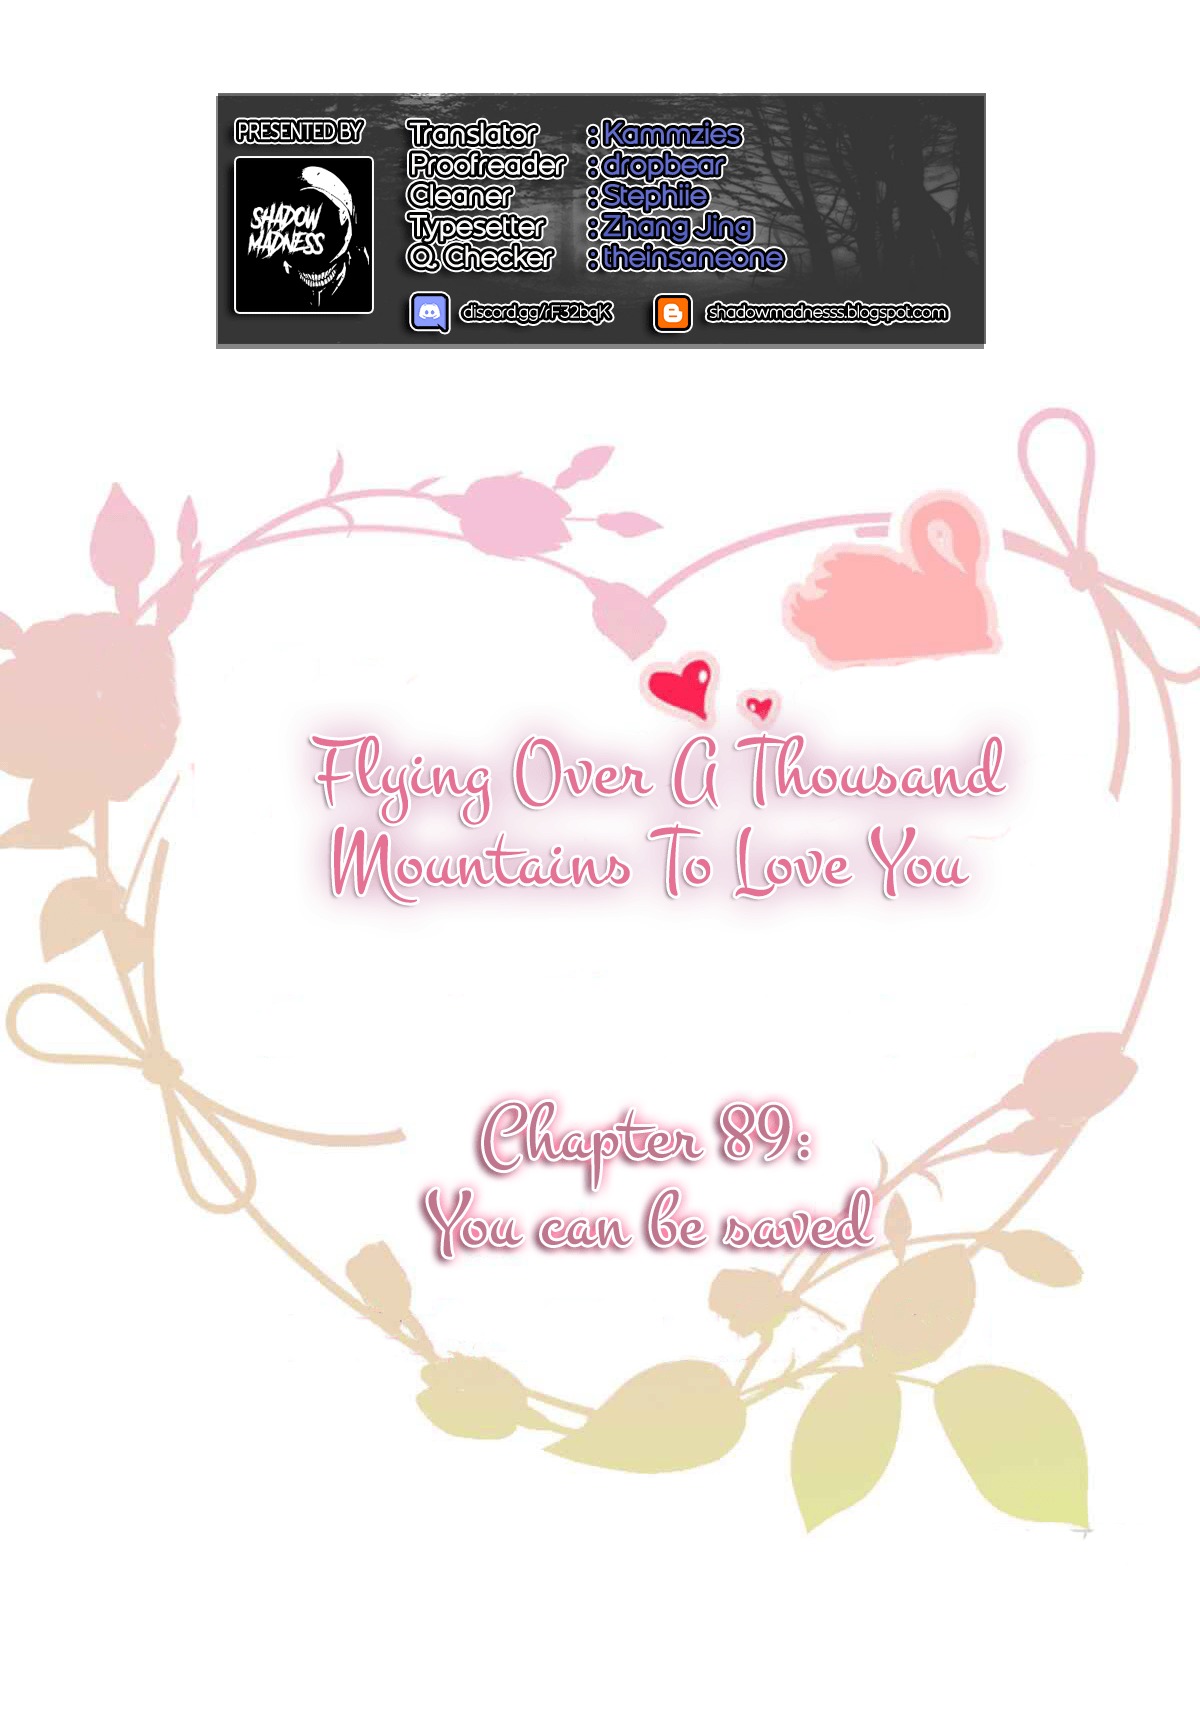 Flying Over a Thousand Mountains to Love You ch.89